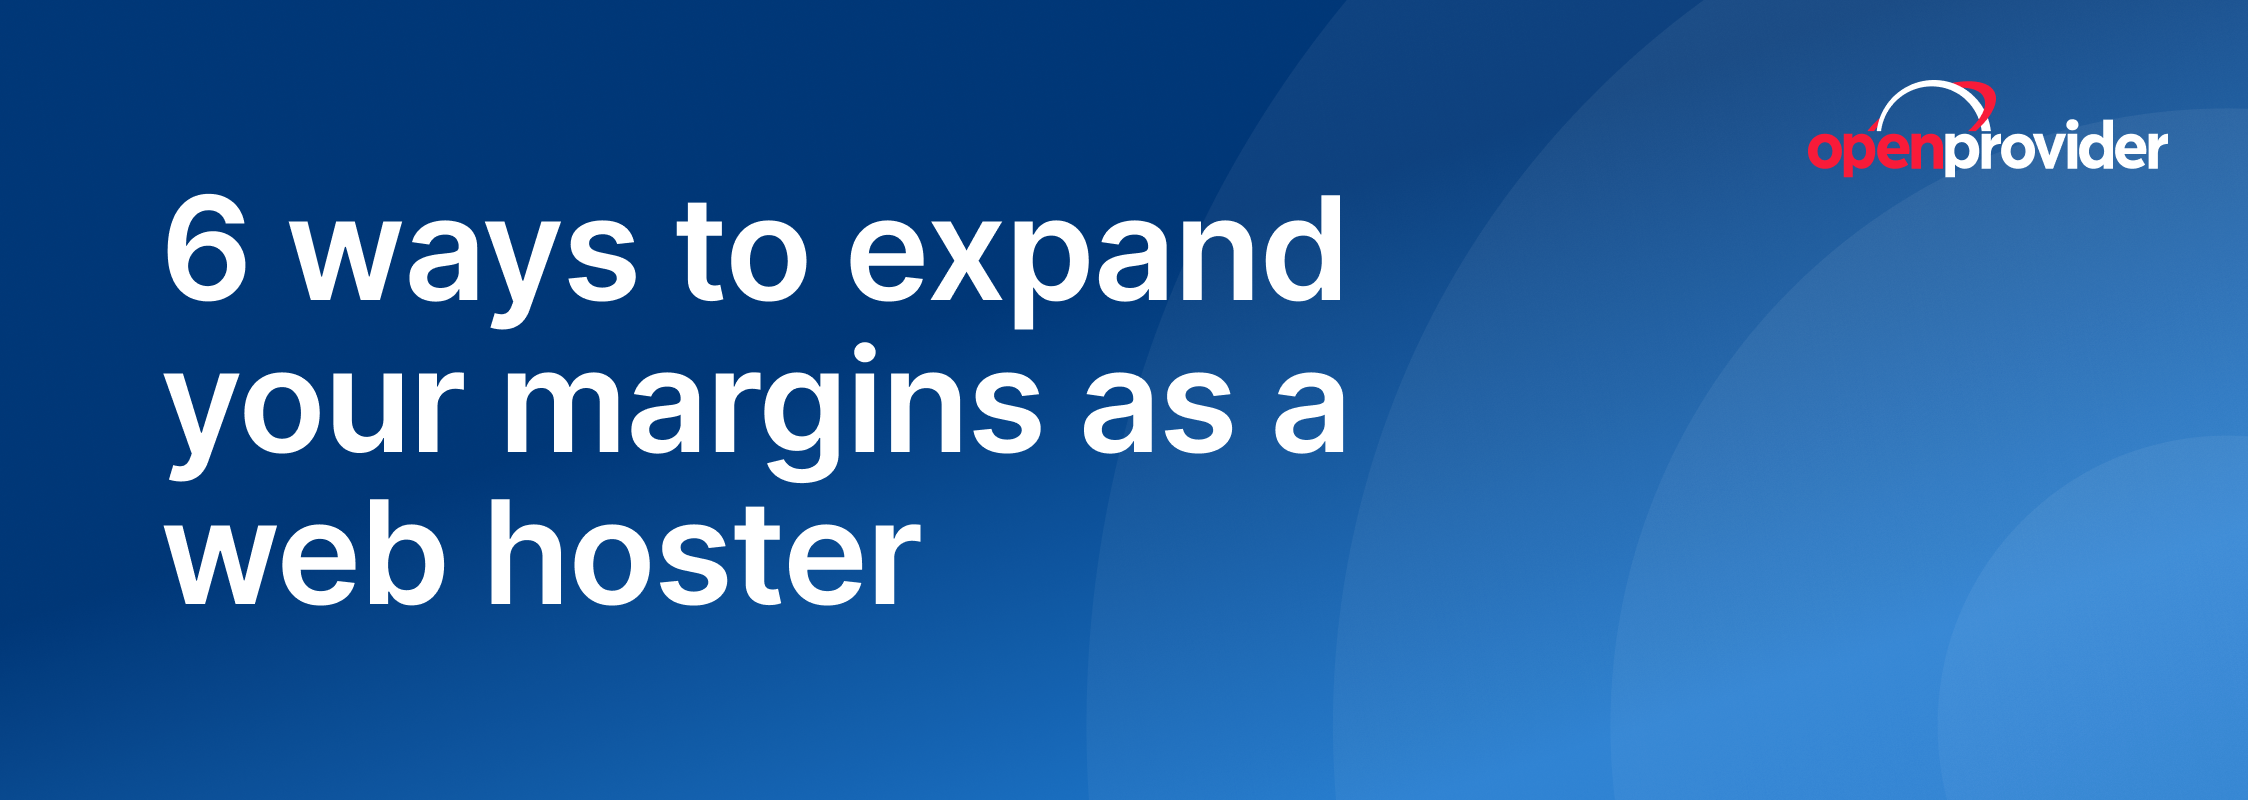 6 ways to expand your margins as a web hoster